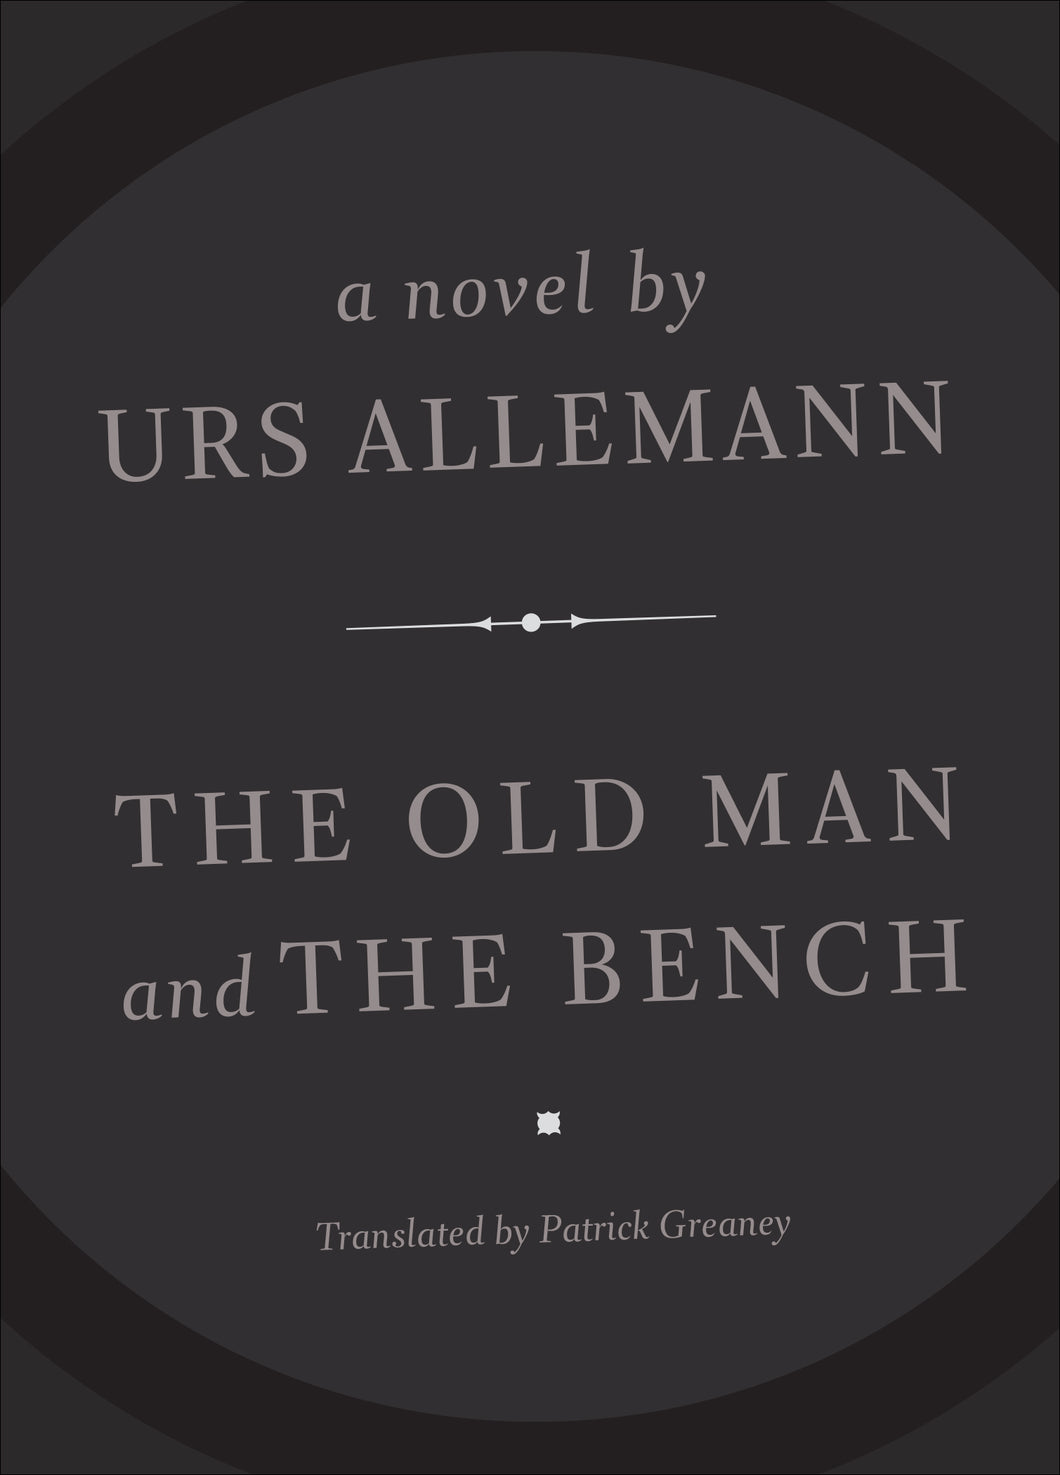 Old Man and the bench by Urs Allemann,cover